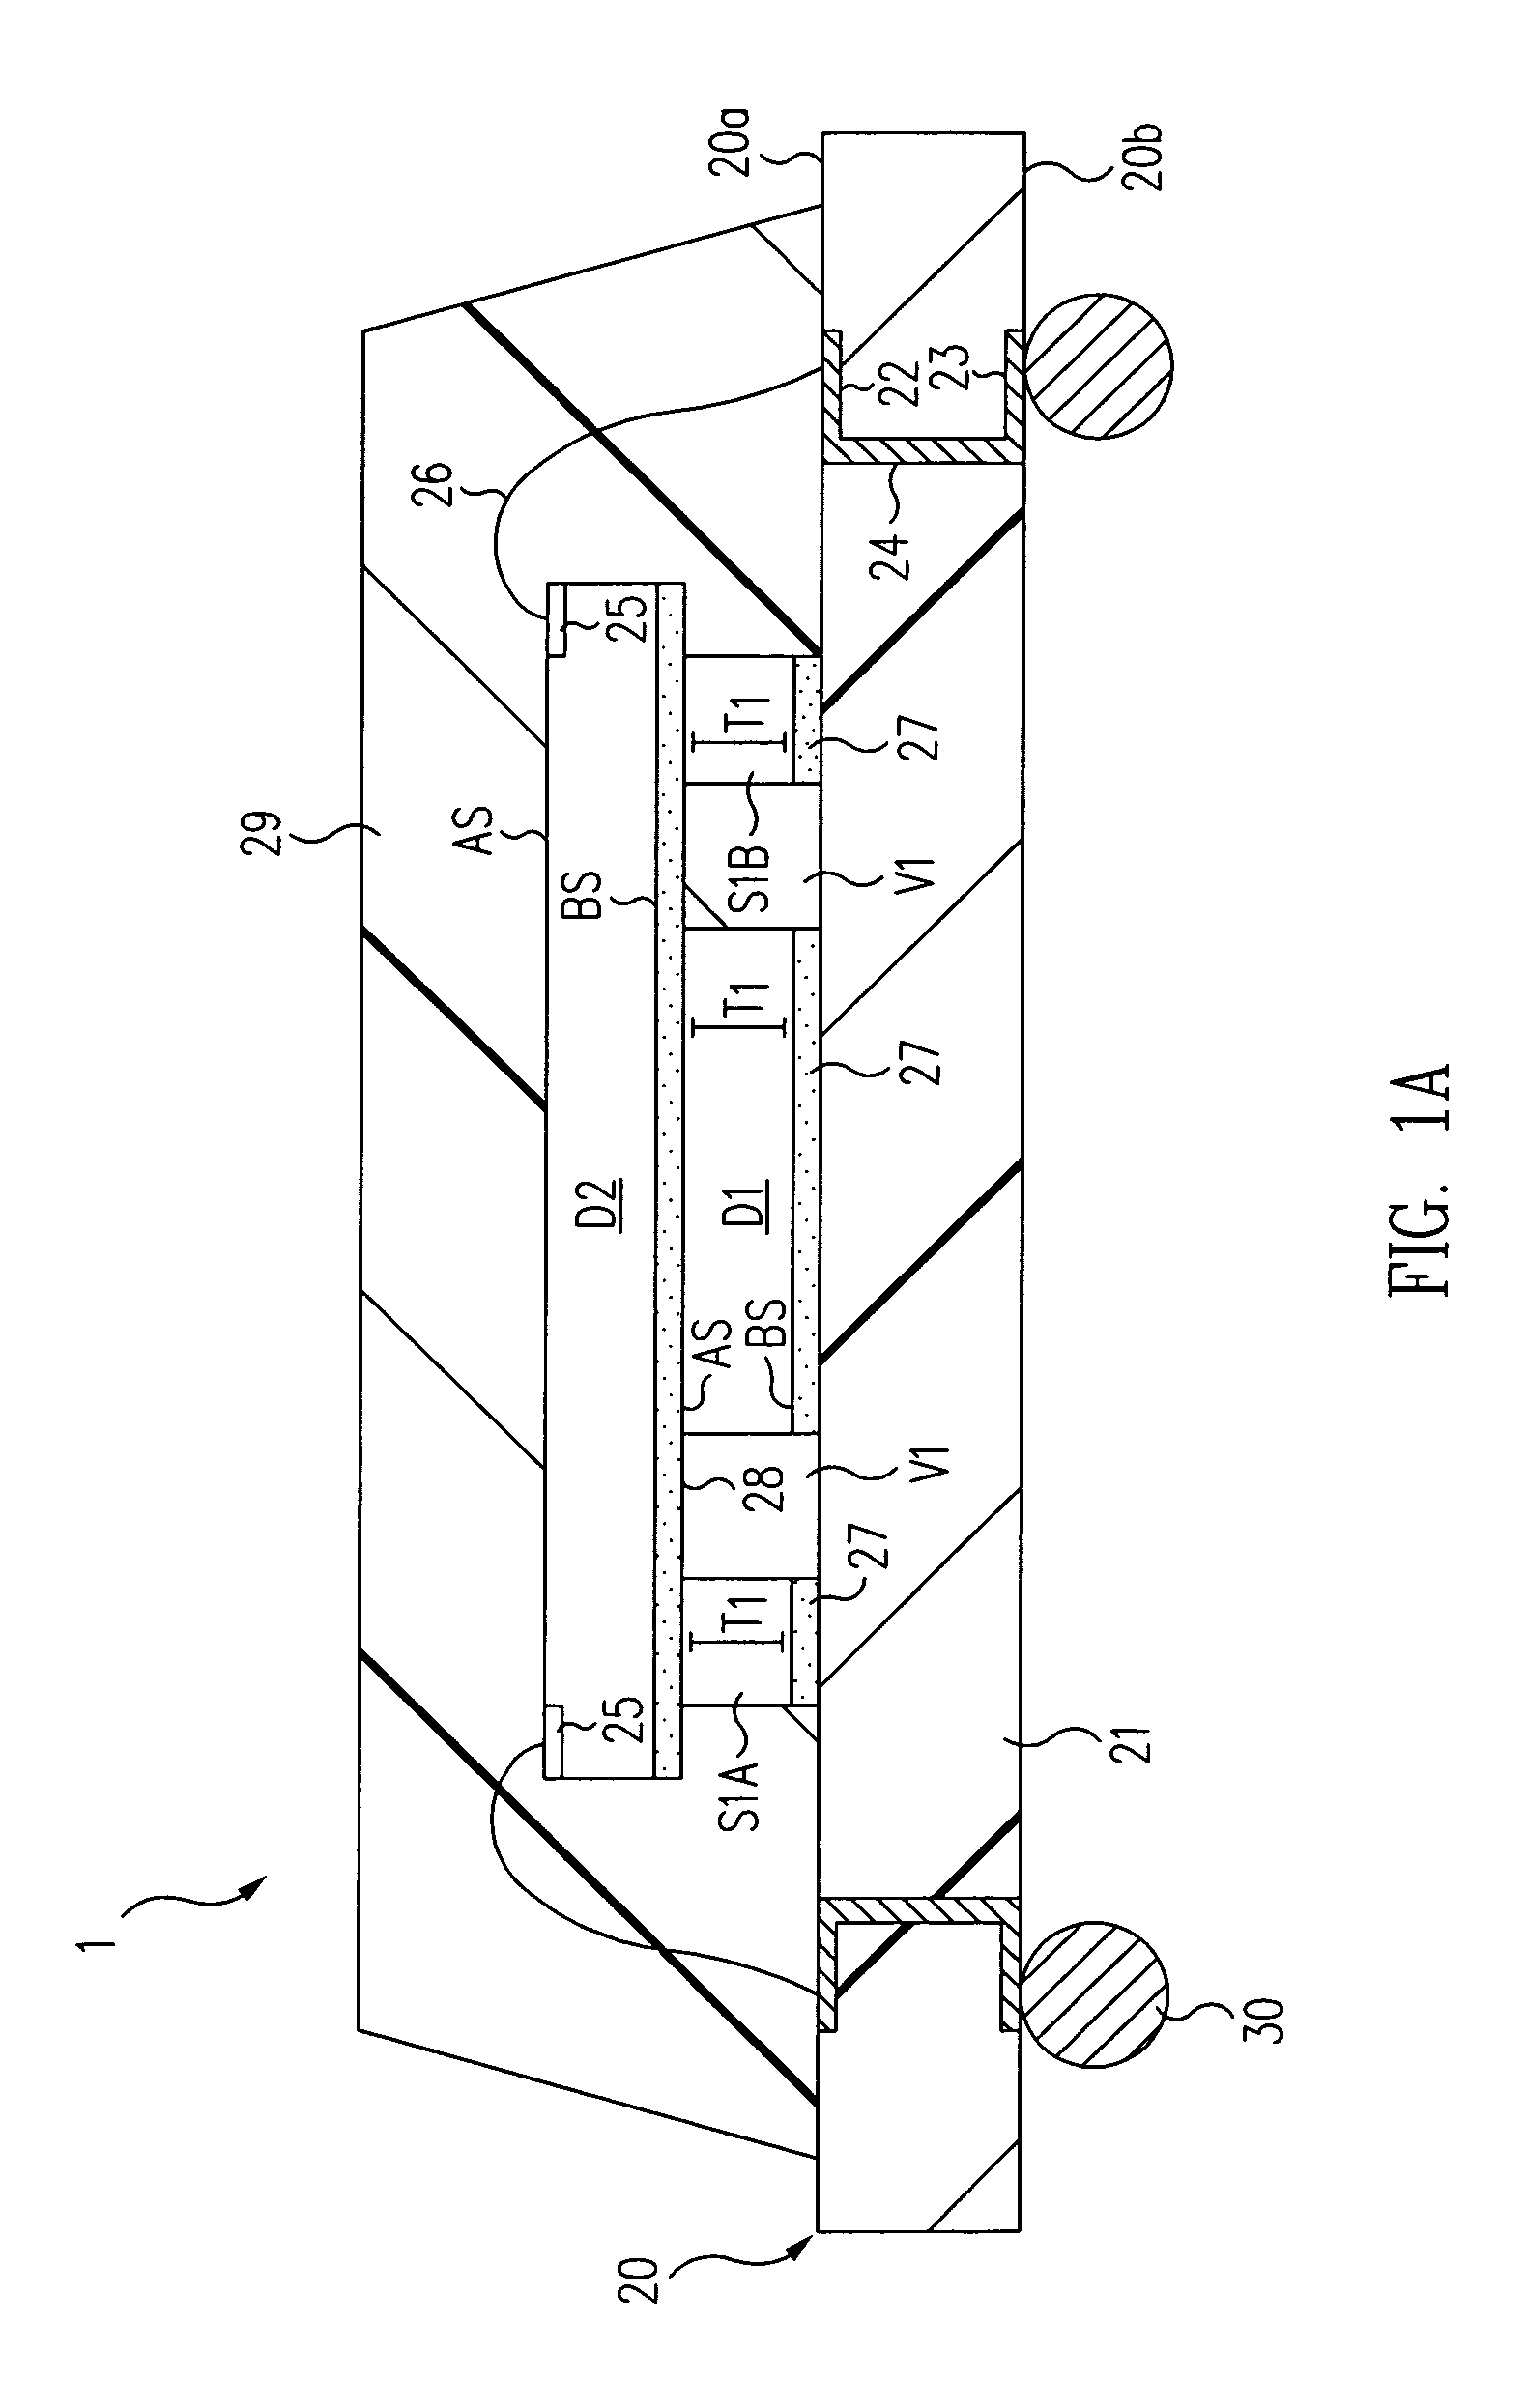 Stacked semiconductor die assembly having at least one support